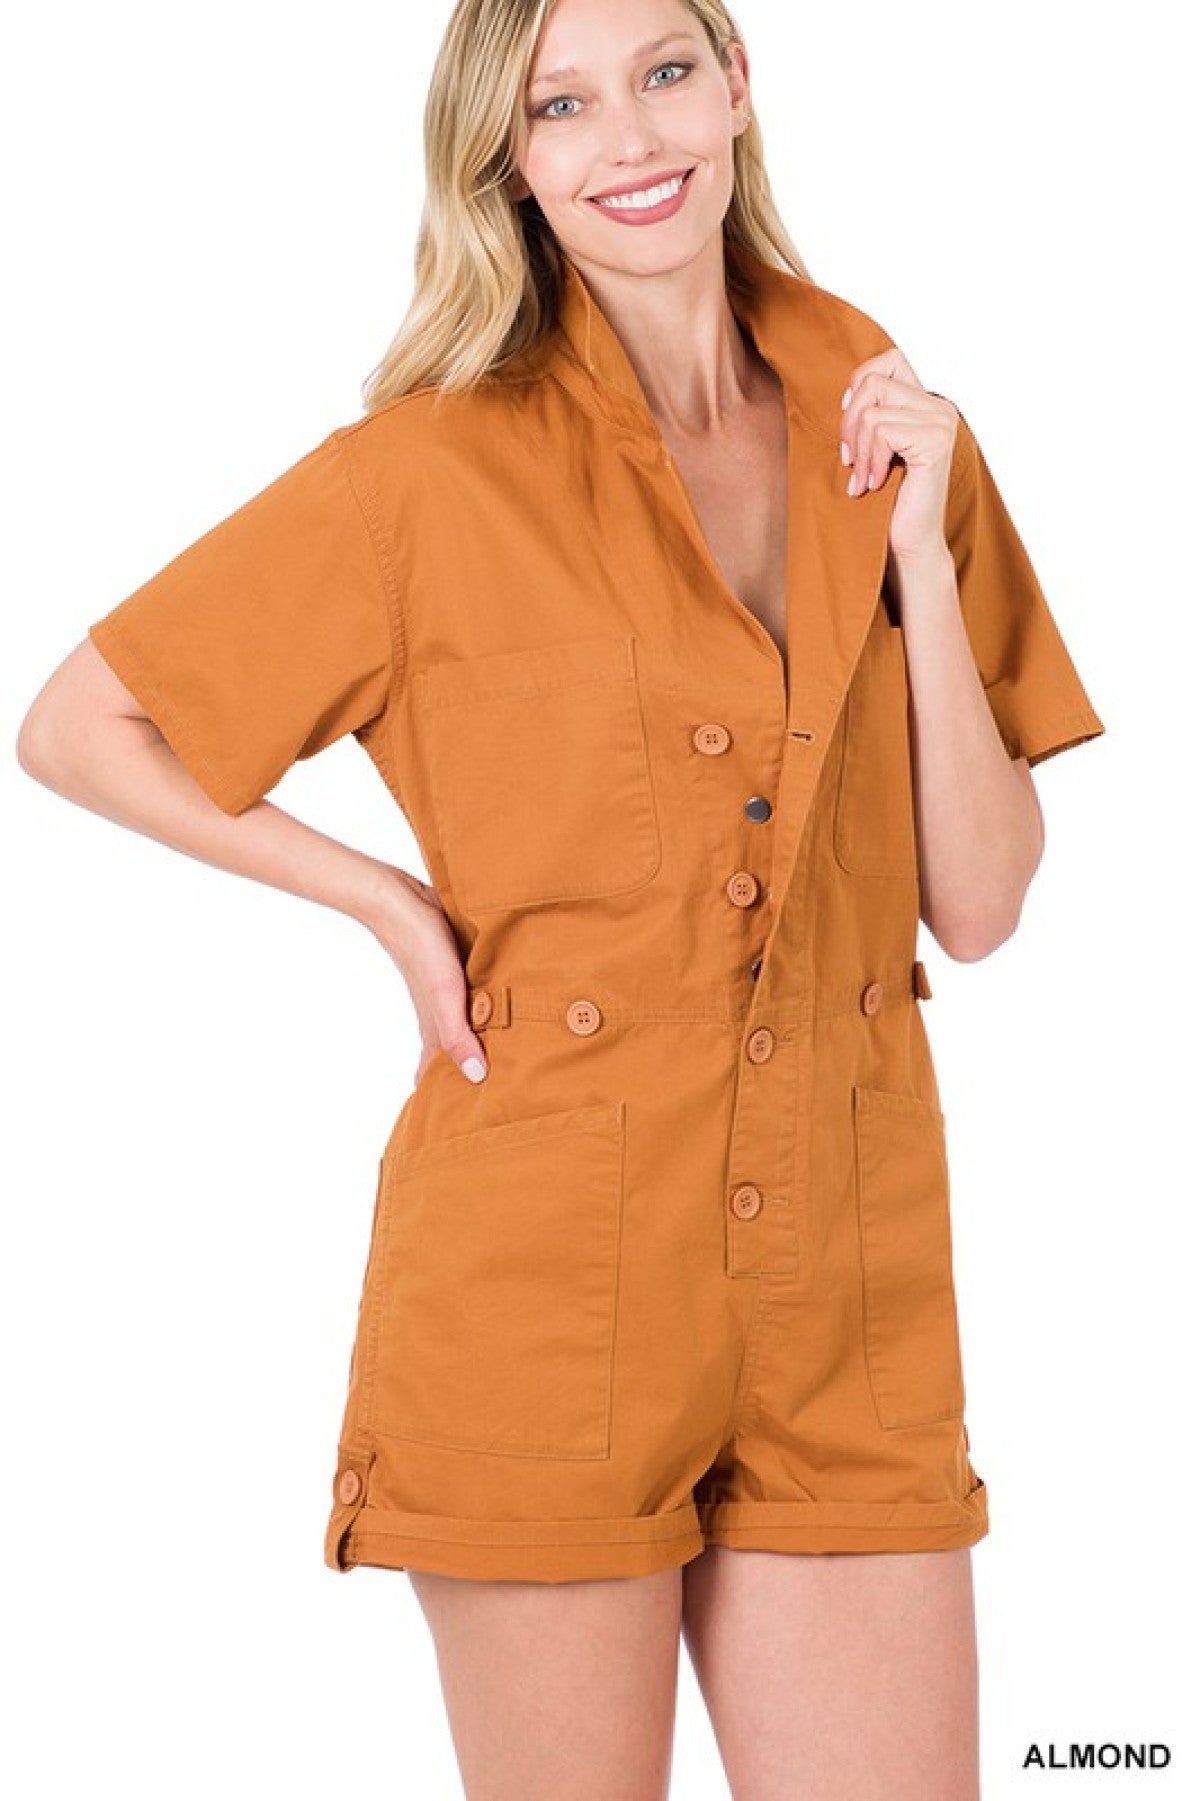 ALMOND - Zenana Woven Cotton Button Front Shirt Romper - Ships from The US - womens rompers at TFC&H Co.